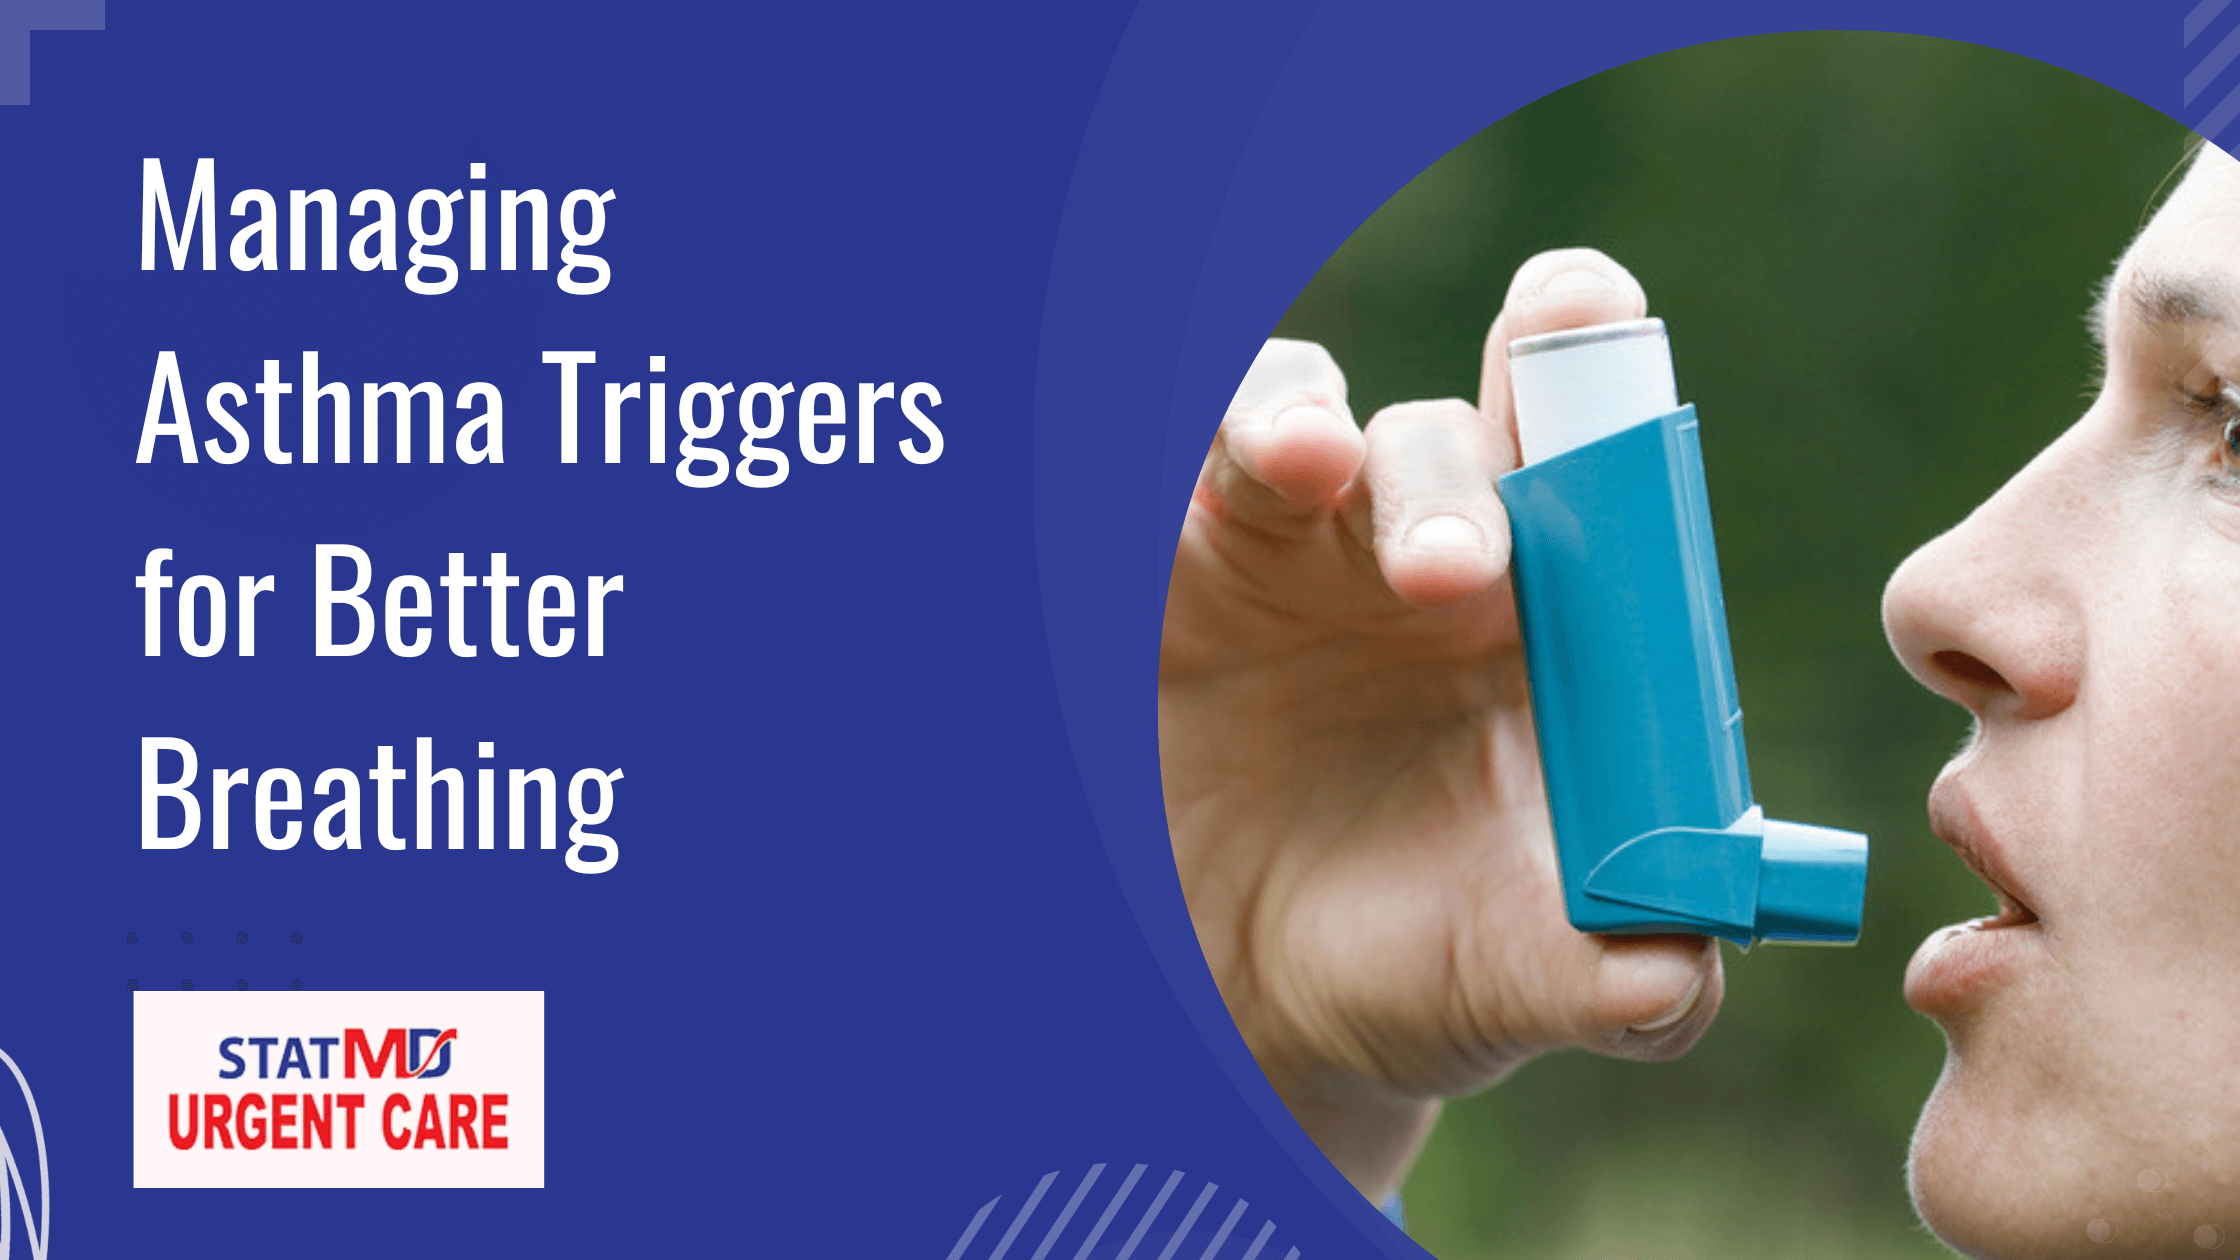 Managing Asthma Triggers for Better Breathing